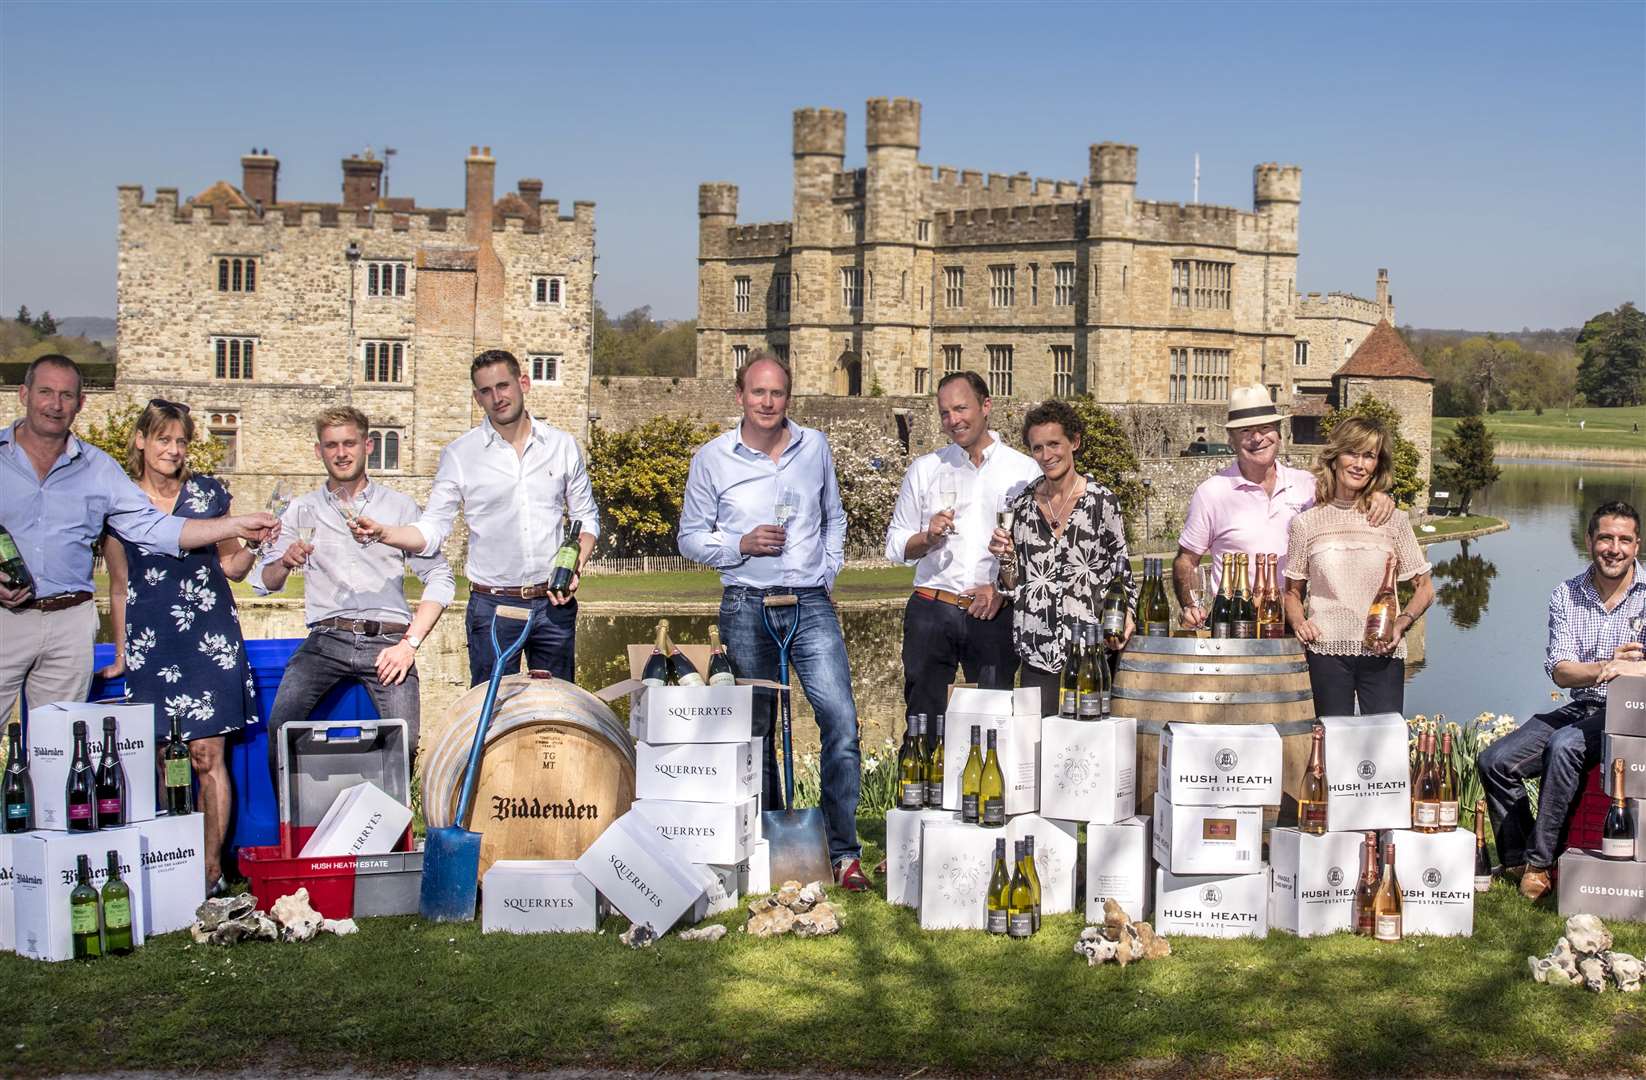 The Wine Garden of England is a partnership of seven vineyards in the county